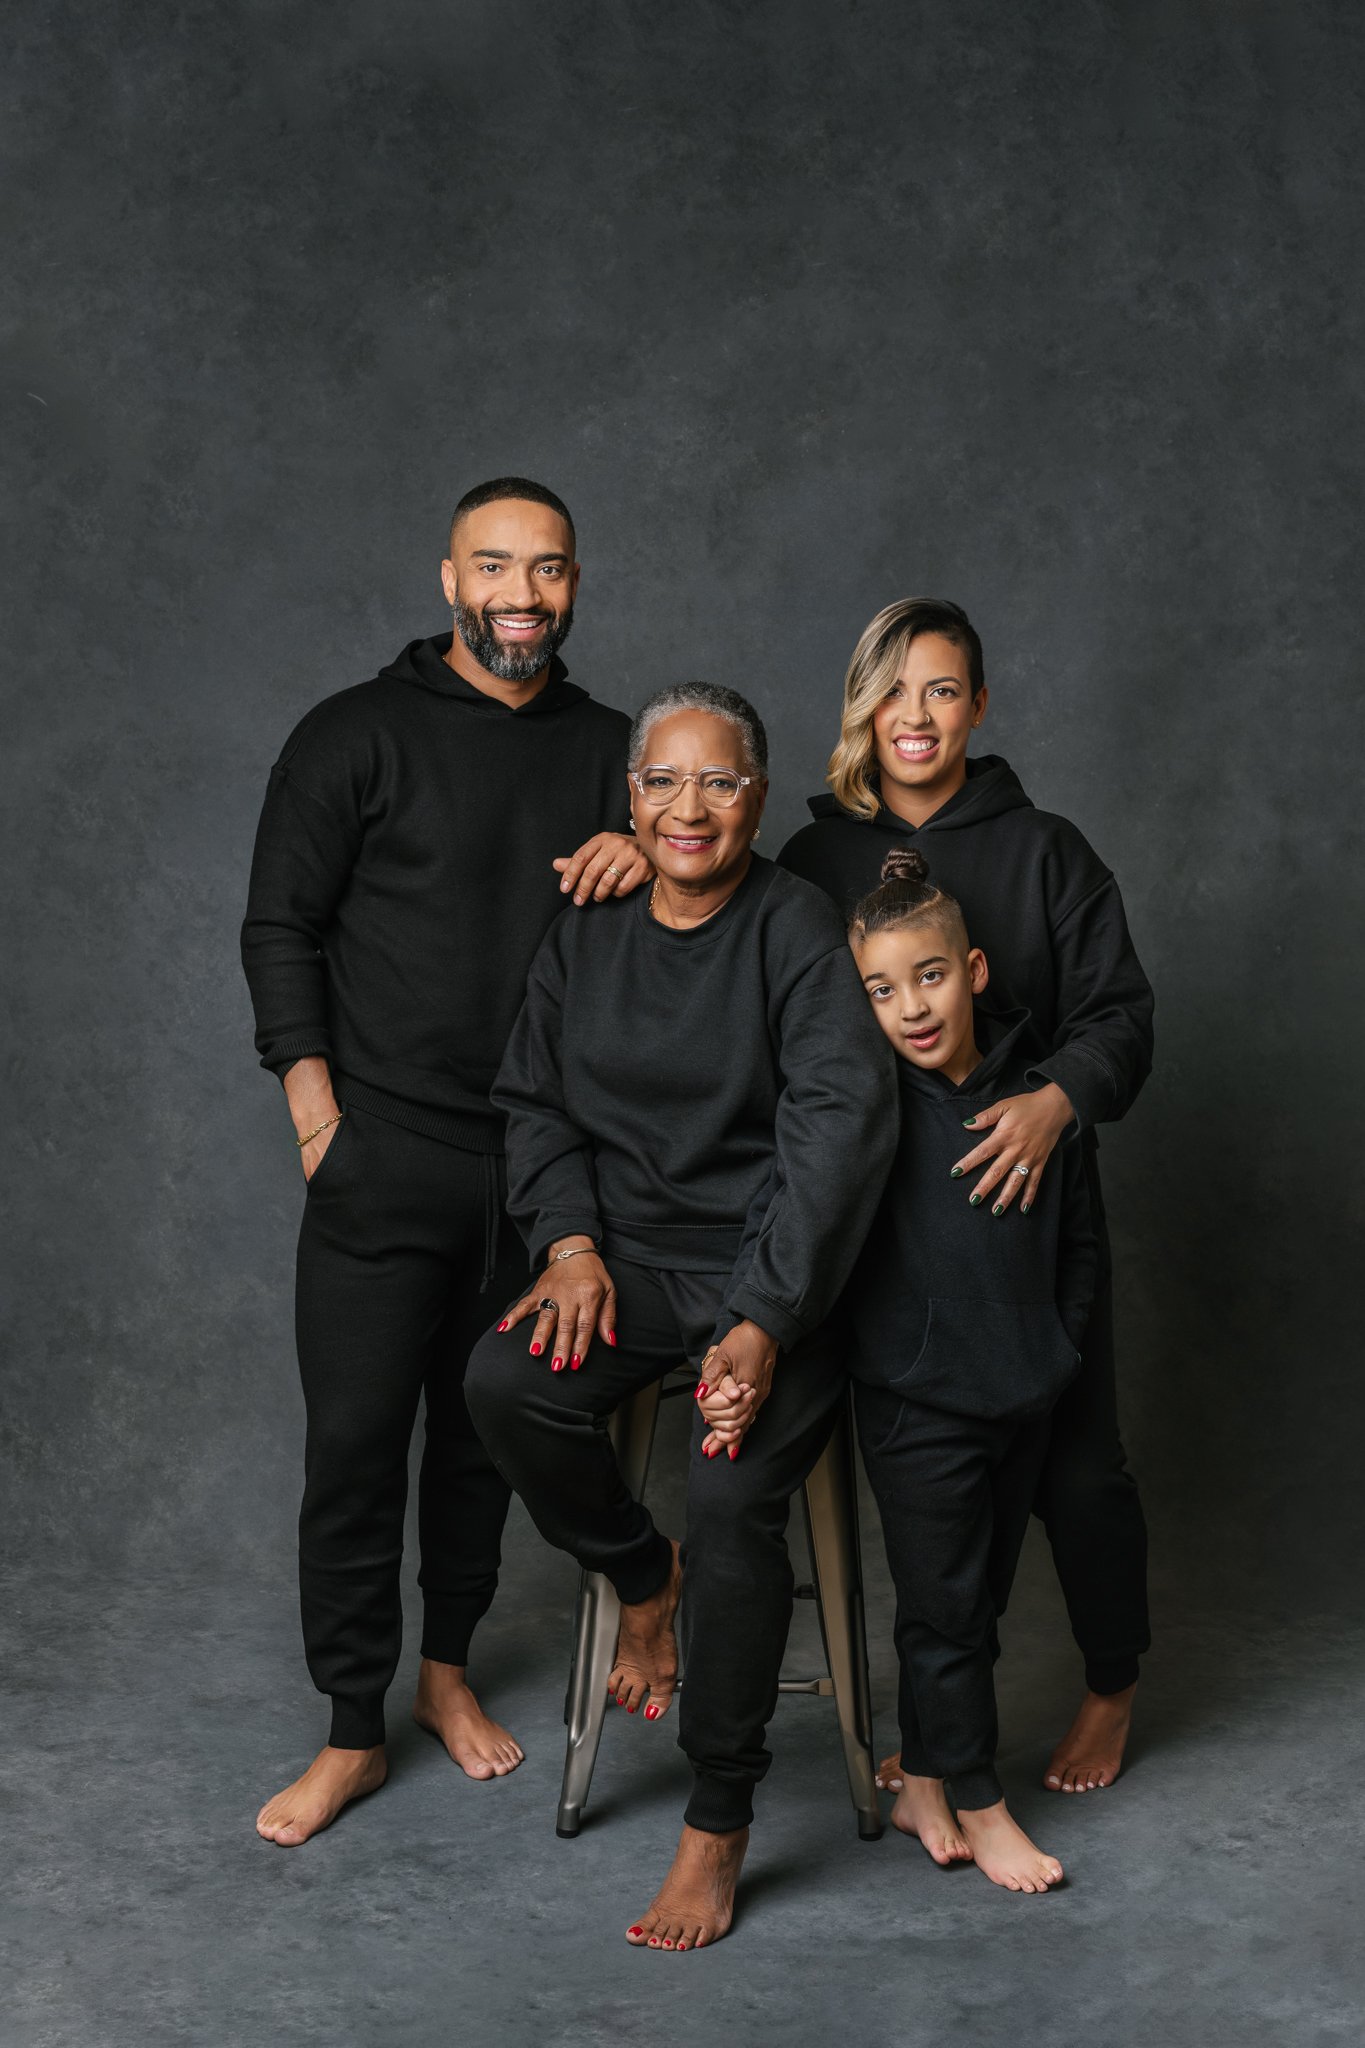  Nicole Hawkins Photography captures a portrait of a family of three and their grandma. extended family pictures #NicoleHawkinsPhotograaphy #NicoleHawkinsFamilies #Modernfamilypictures #studioportraits #matchingfamilyoutfits #NJphotographer 